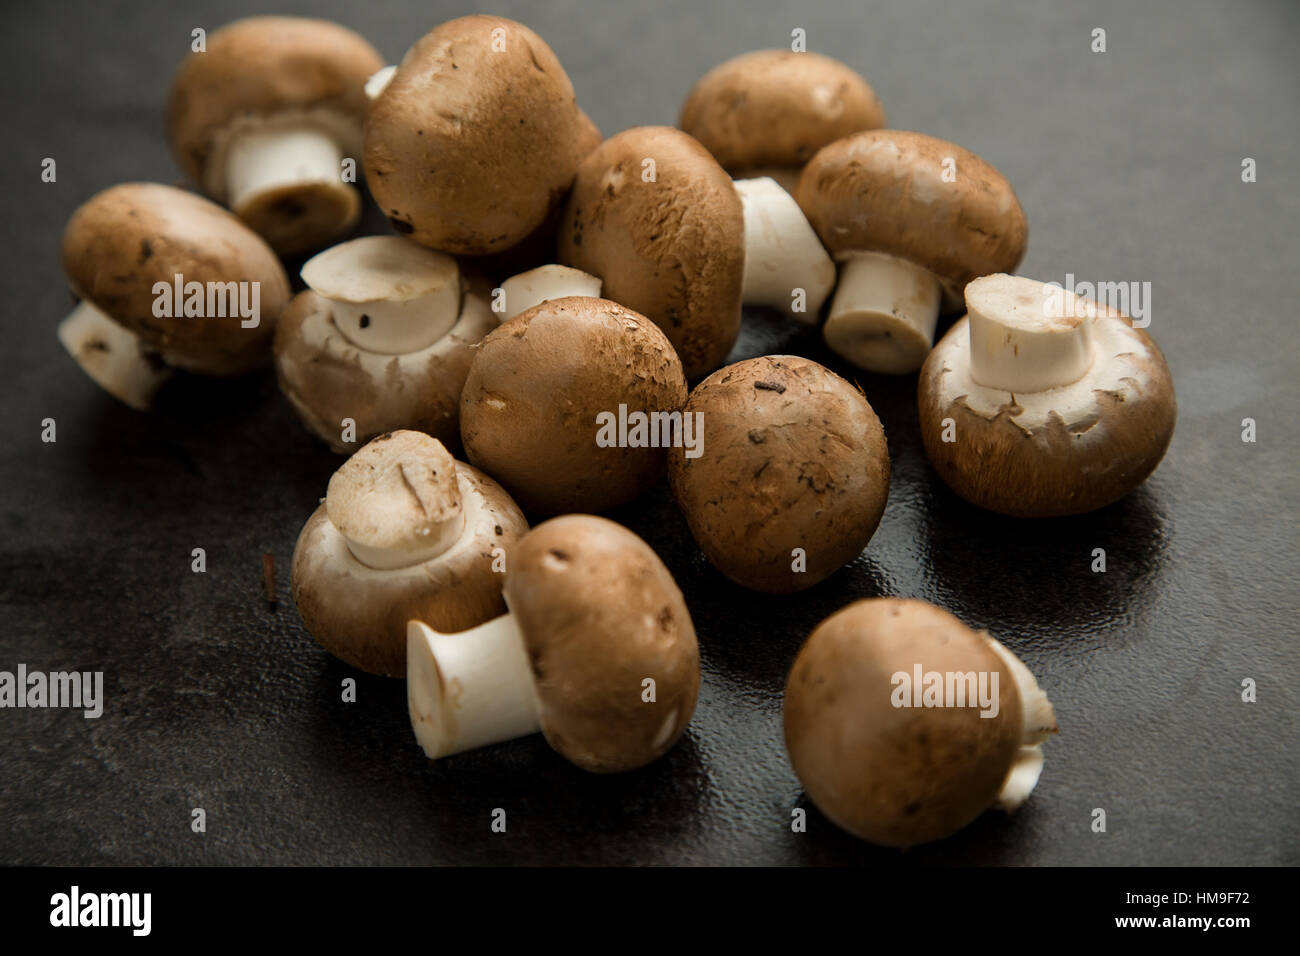 a pile of organic mushrooms on a dark surface Stock Photo